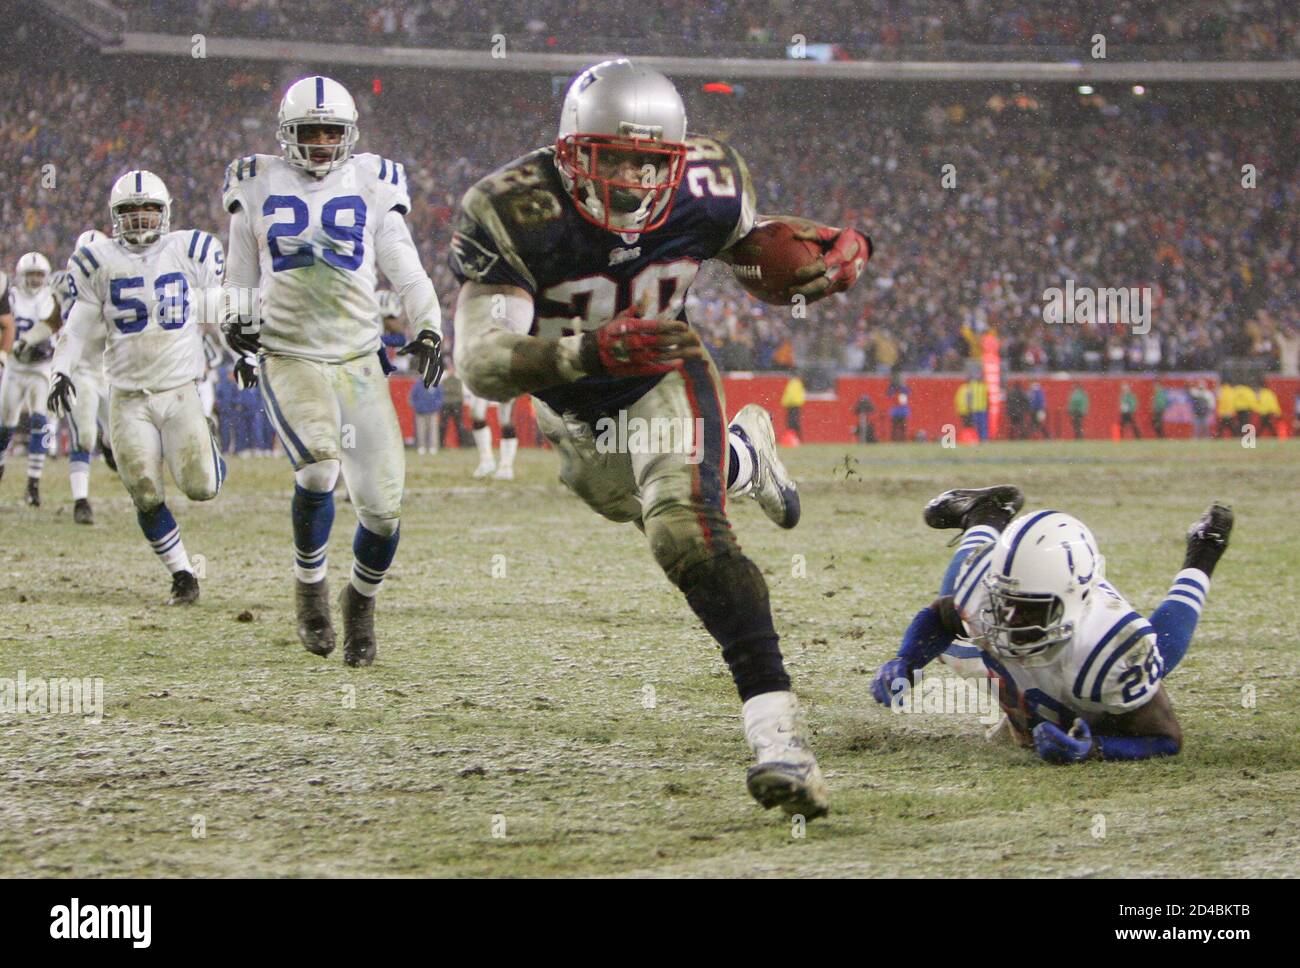 New England Patriots running back Corey Dillon (C) runs for a first down to the one yard line during the fourth quarter of their AFC Divisional playoff game against the Indianapolis Colts in Foxboro, Massachusetts, January 16, 2005. The Patriots scored one play later on a quarterback Tom Brady keeper and went on to win the game 20-3, to advance to the AFC Championship game against the Pittsburgh Steelers next week. Colts defenders Idrees Bashir (28) and Joseph Jefferson (29) and Gary Brackett (58) pursue. REUTERS/Mike Segar  MS Stock Photo